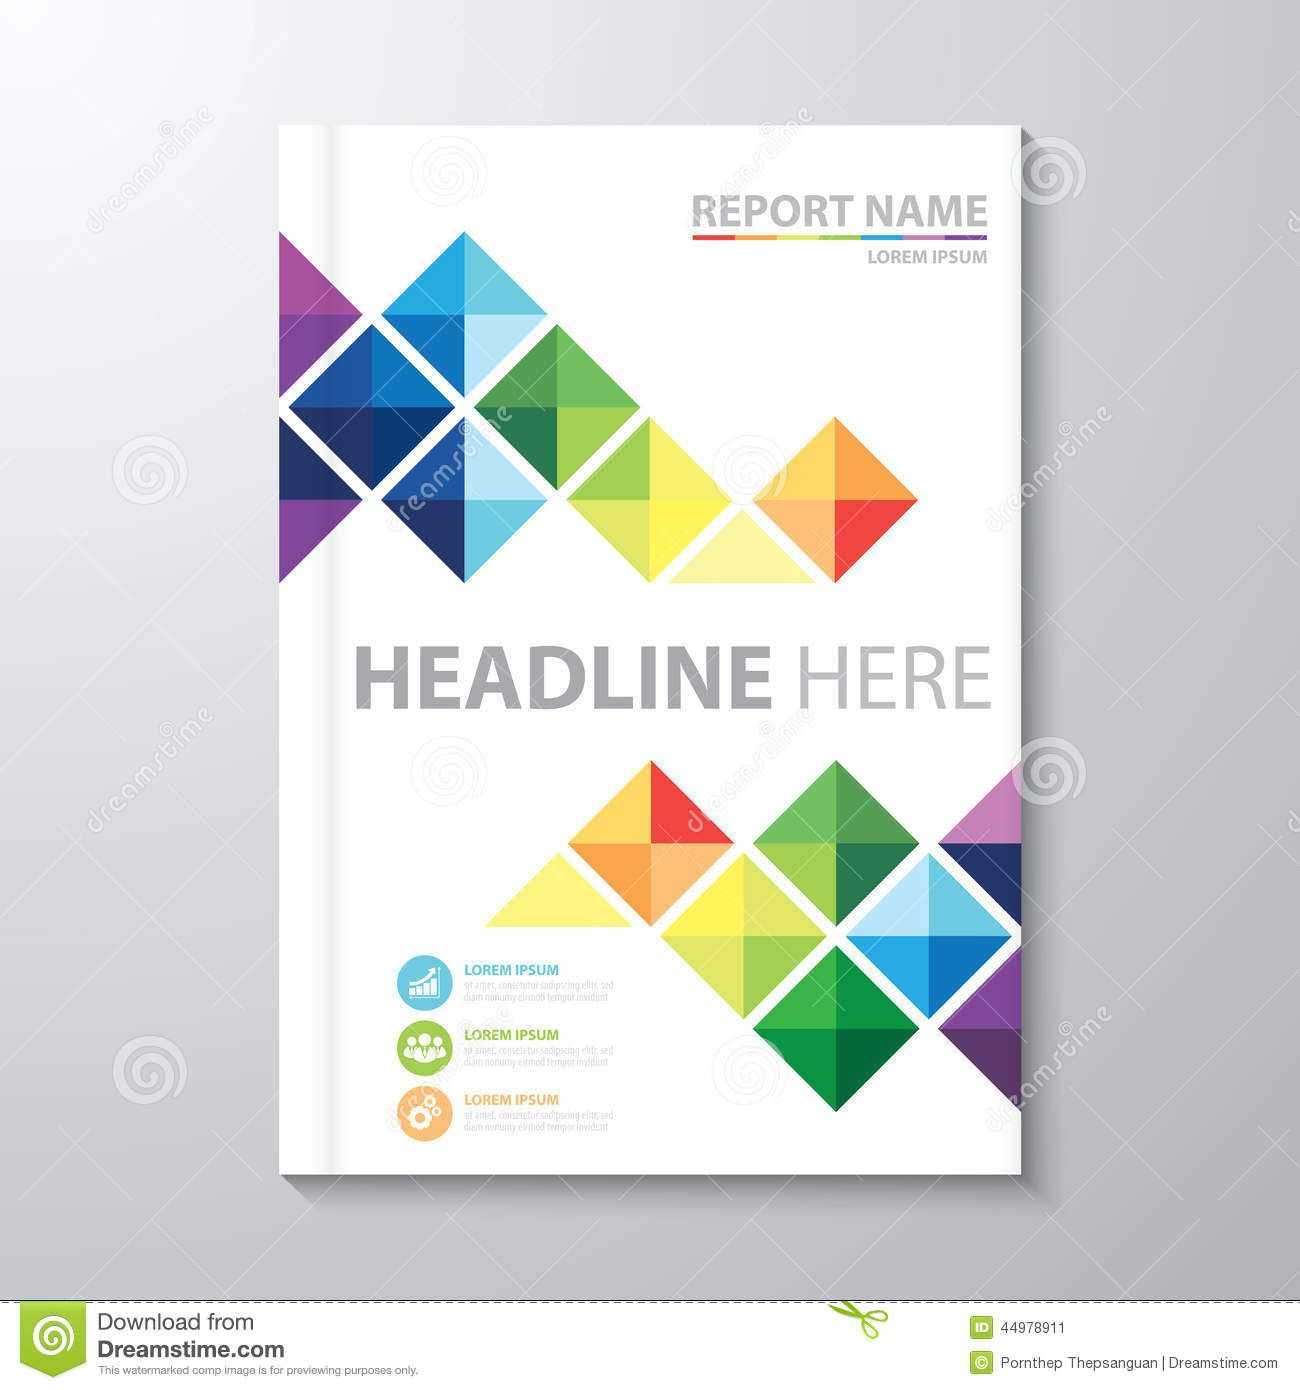 011 Template Ideas Report Cover Page Archaicawful Microsoft Intended For Microsoft Word Cover Page Templates Download